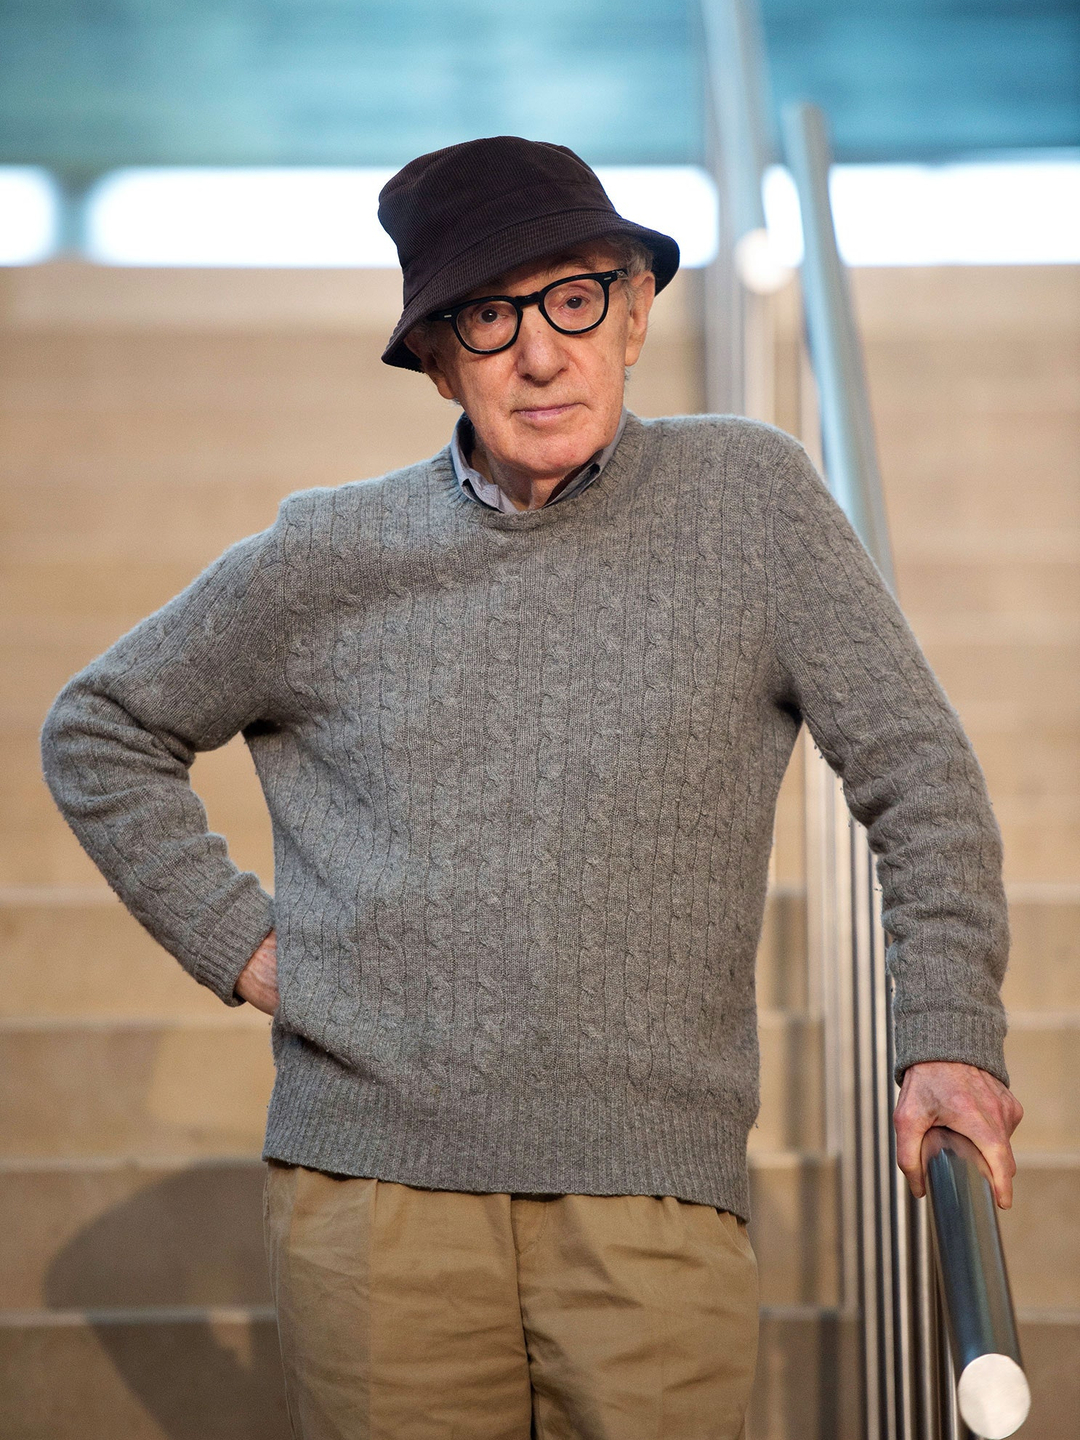 Woody Allen how did he became famous